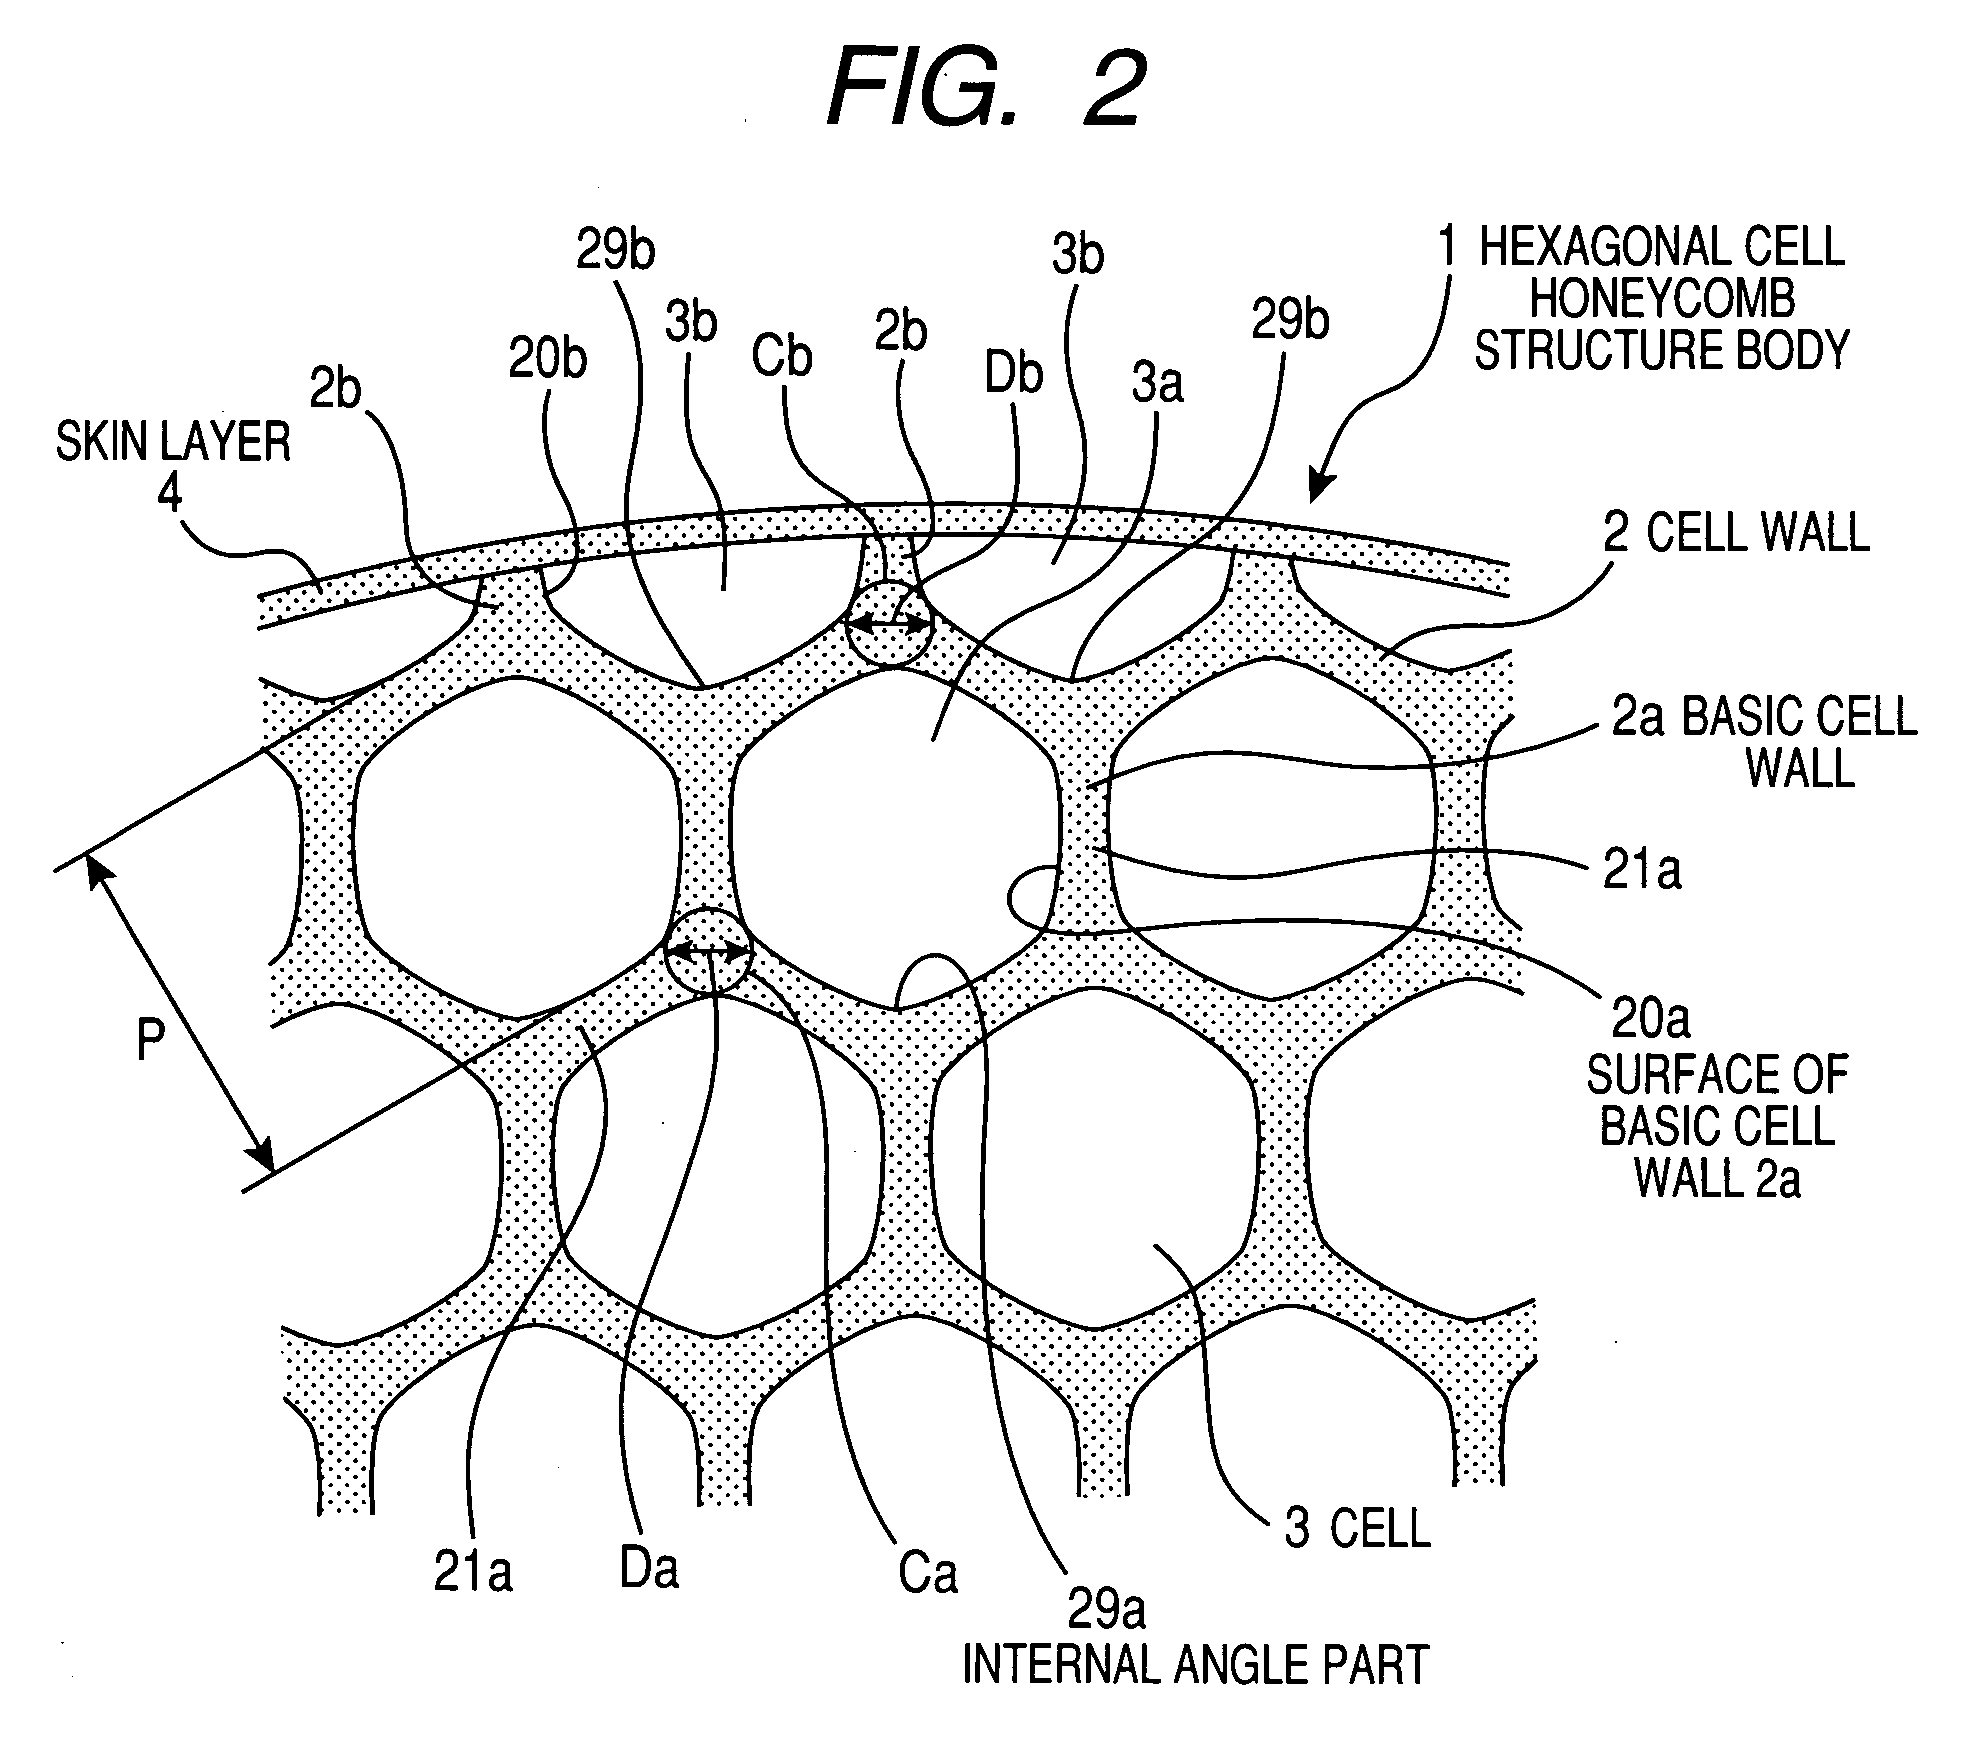 Hexgonal cell honeycomb structure body